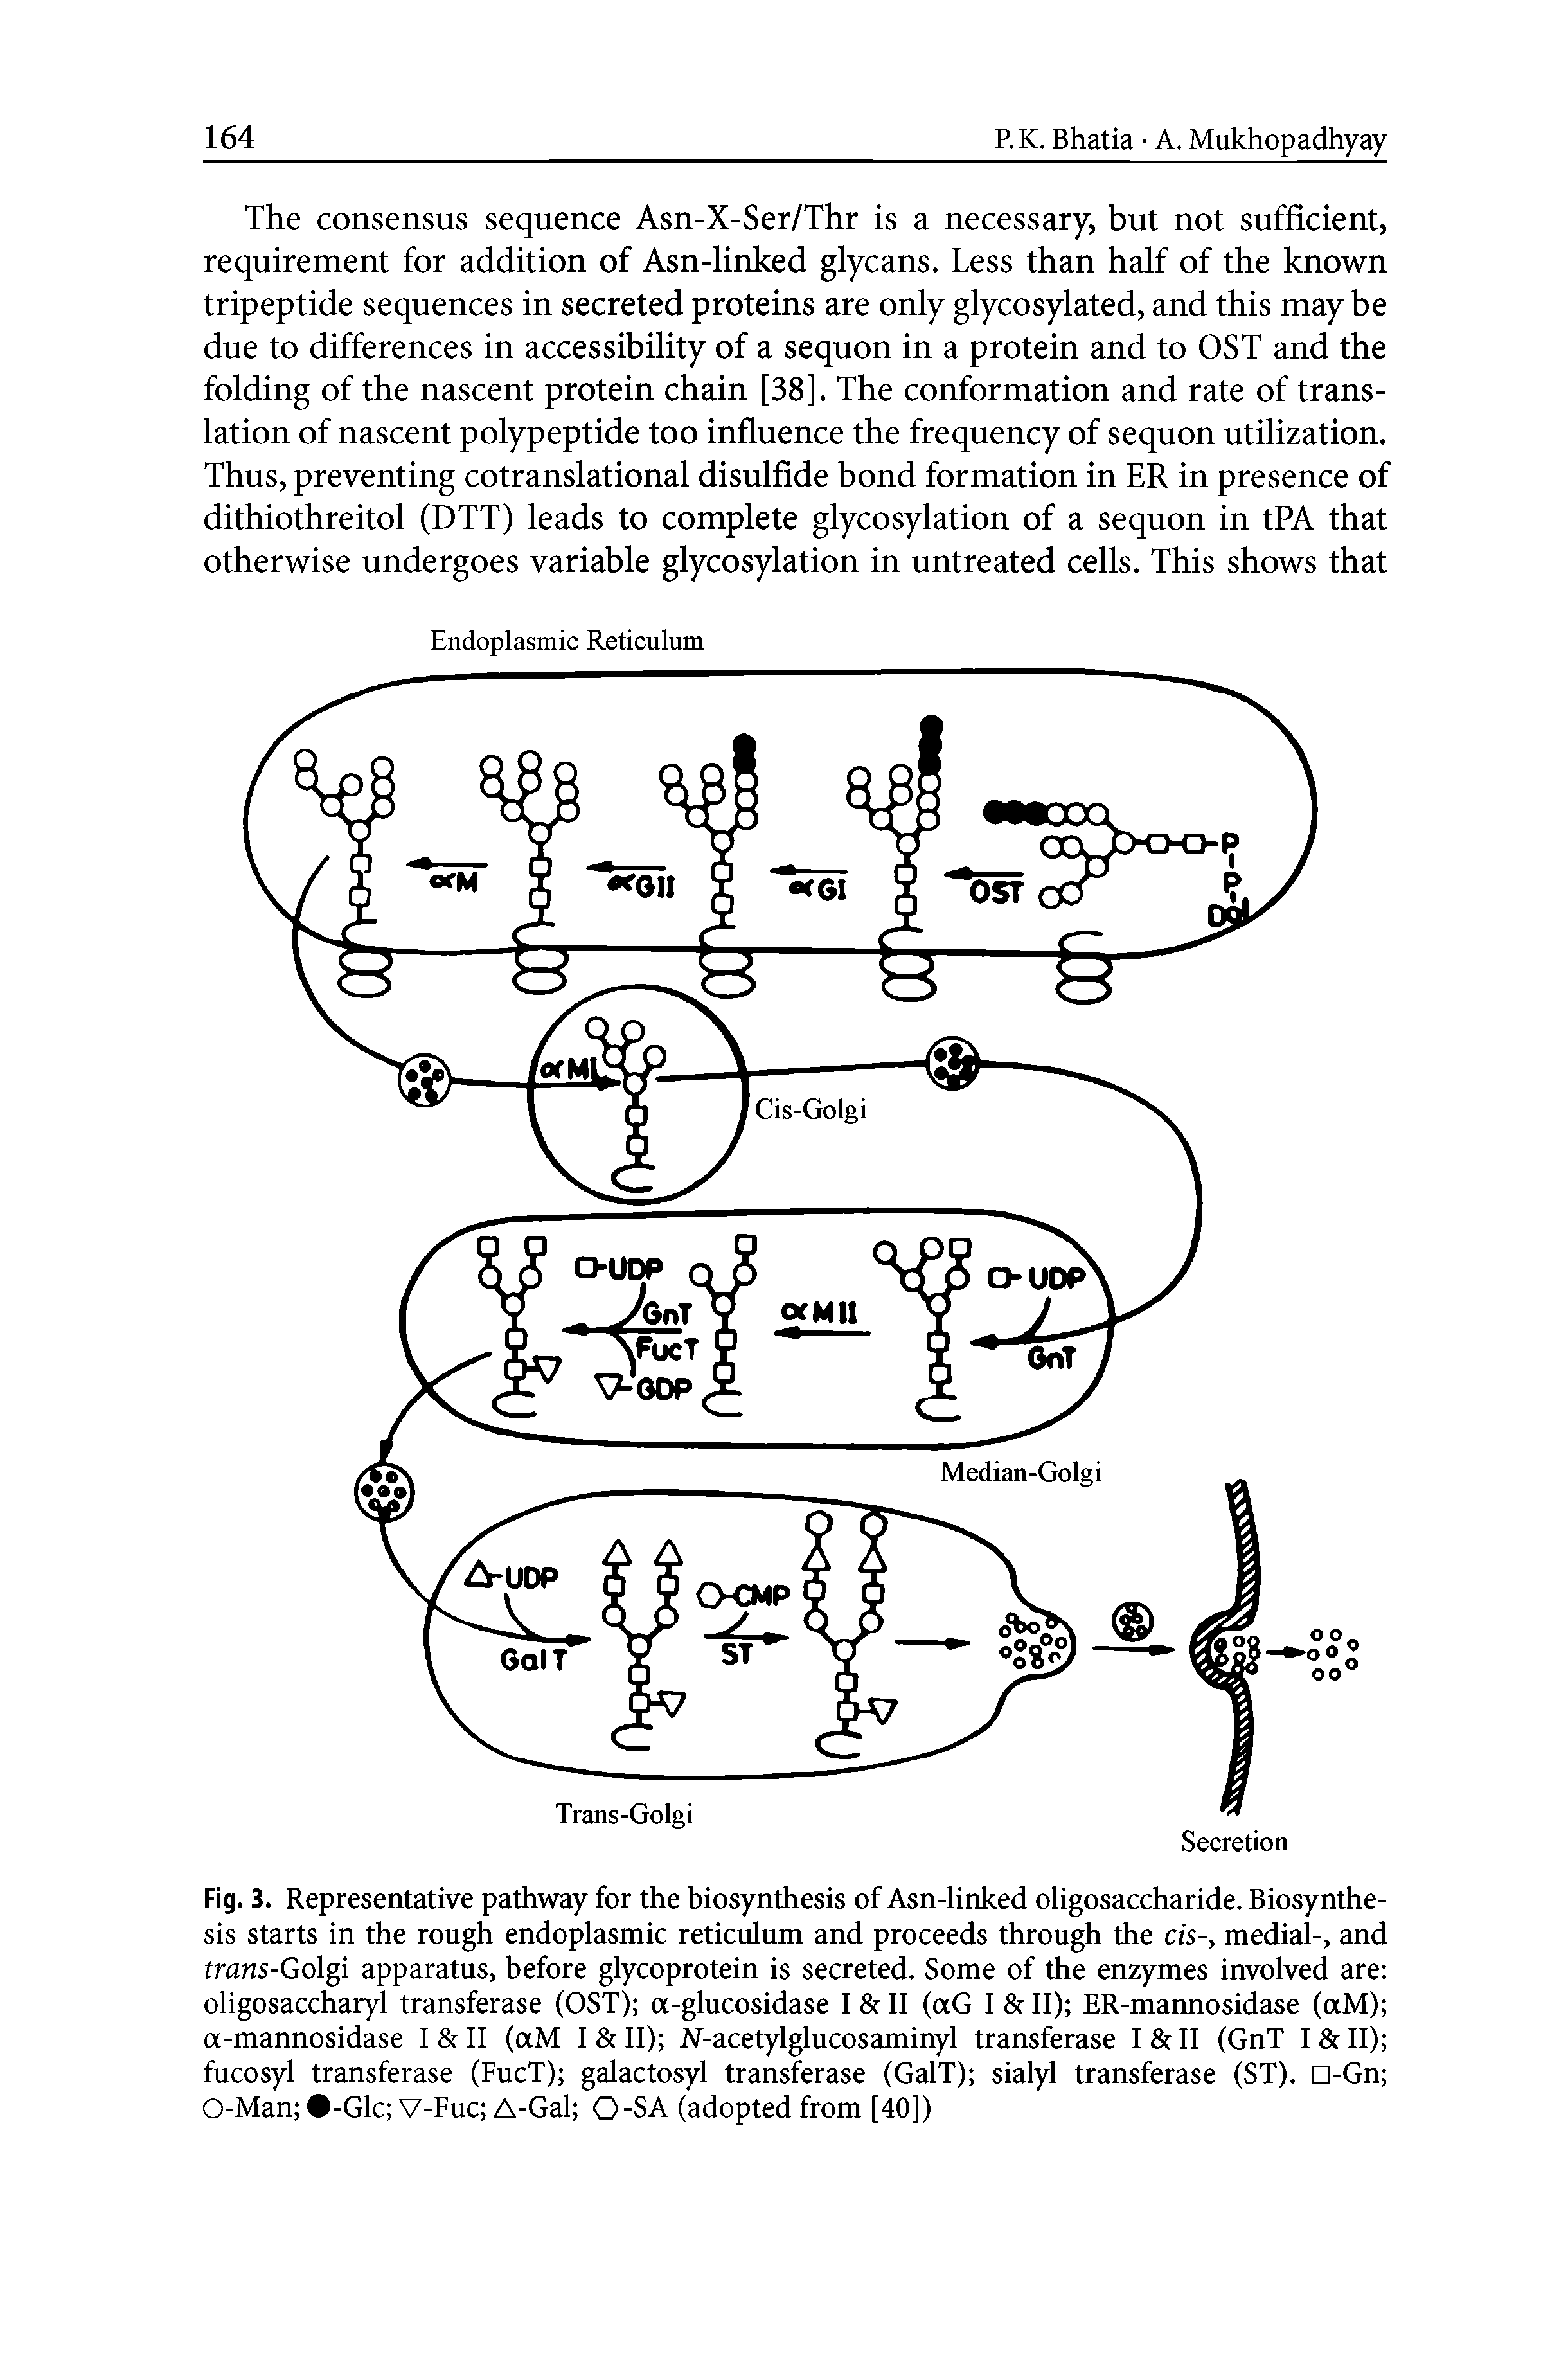 Fig. 3. Representative pathway for the biosynthesis of Asn-linked oligosaccharide. Biosynthesis starts in the rough endoplasmic reticulum and proceeds through the cis-, medial-, and trans-Golgi apparatus, before glycoprotein is secreted. Some of the enzymes involved are oligosaccharyl transferase (OST) a-glucosidase I II (aG I II) ER-mannosidase (aM) a-mannosidase I II (aM I II) N-acetylglucosaminyl transferase I II (GnT I II) fucosyl transferase (FucT) galactosyl transferase (GalT) sialyl transferase (ST). n-Gn O-Man -Glc V-Fuc A-Gal O-SA (adopted from [40])...